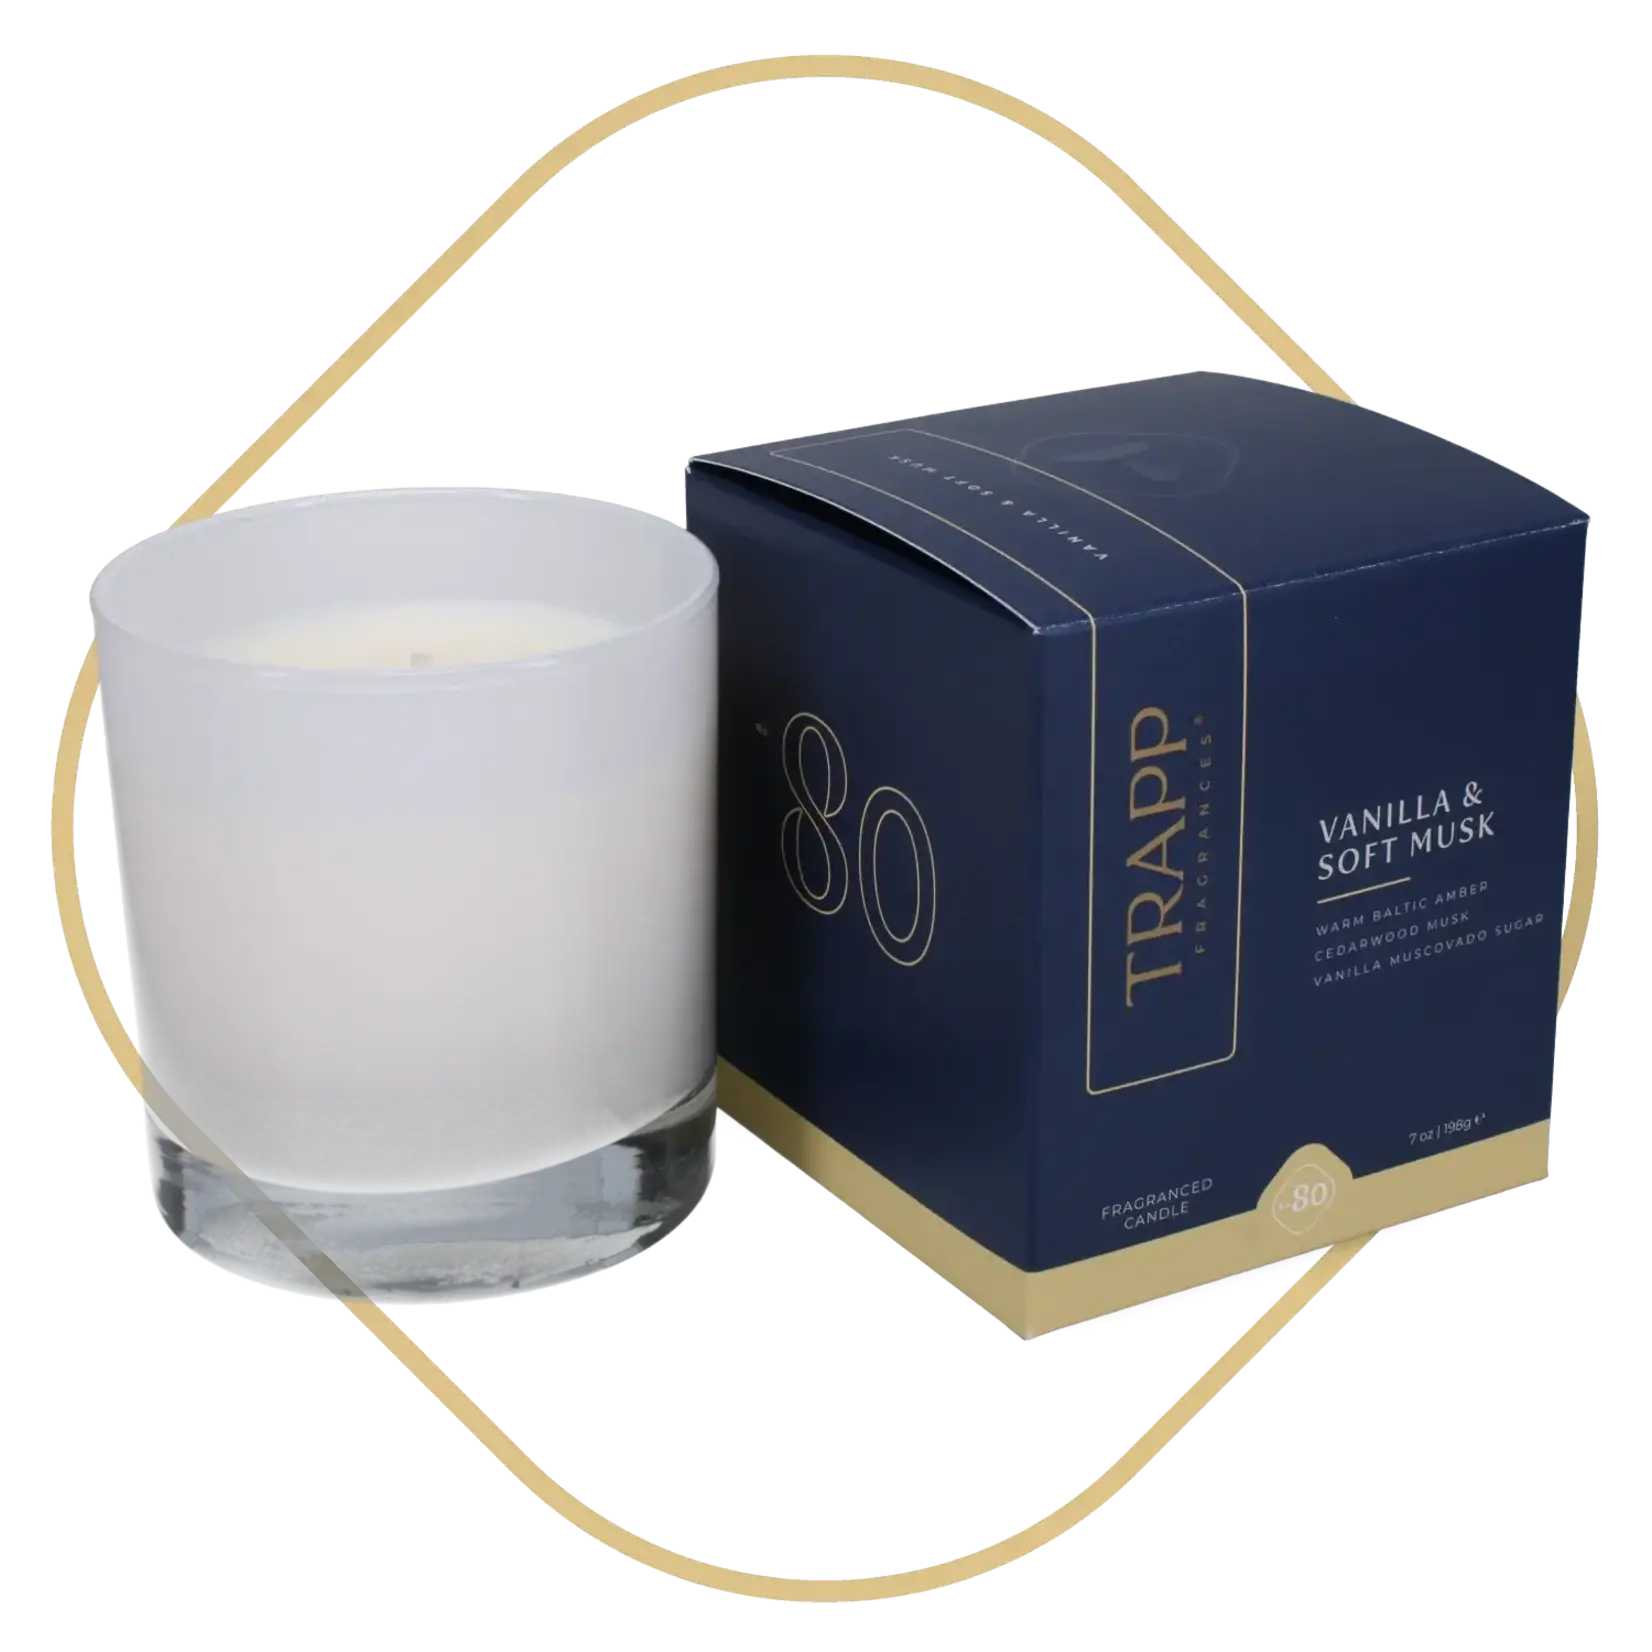 Trapp Candles No. 80 Vanilla & Soft Musk 7 oz. Poured Candle